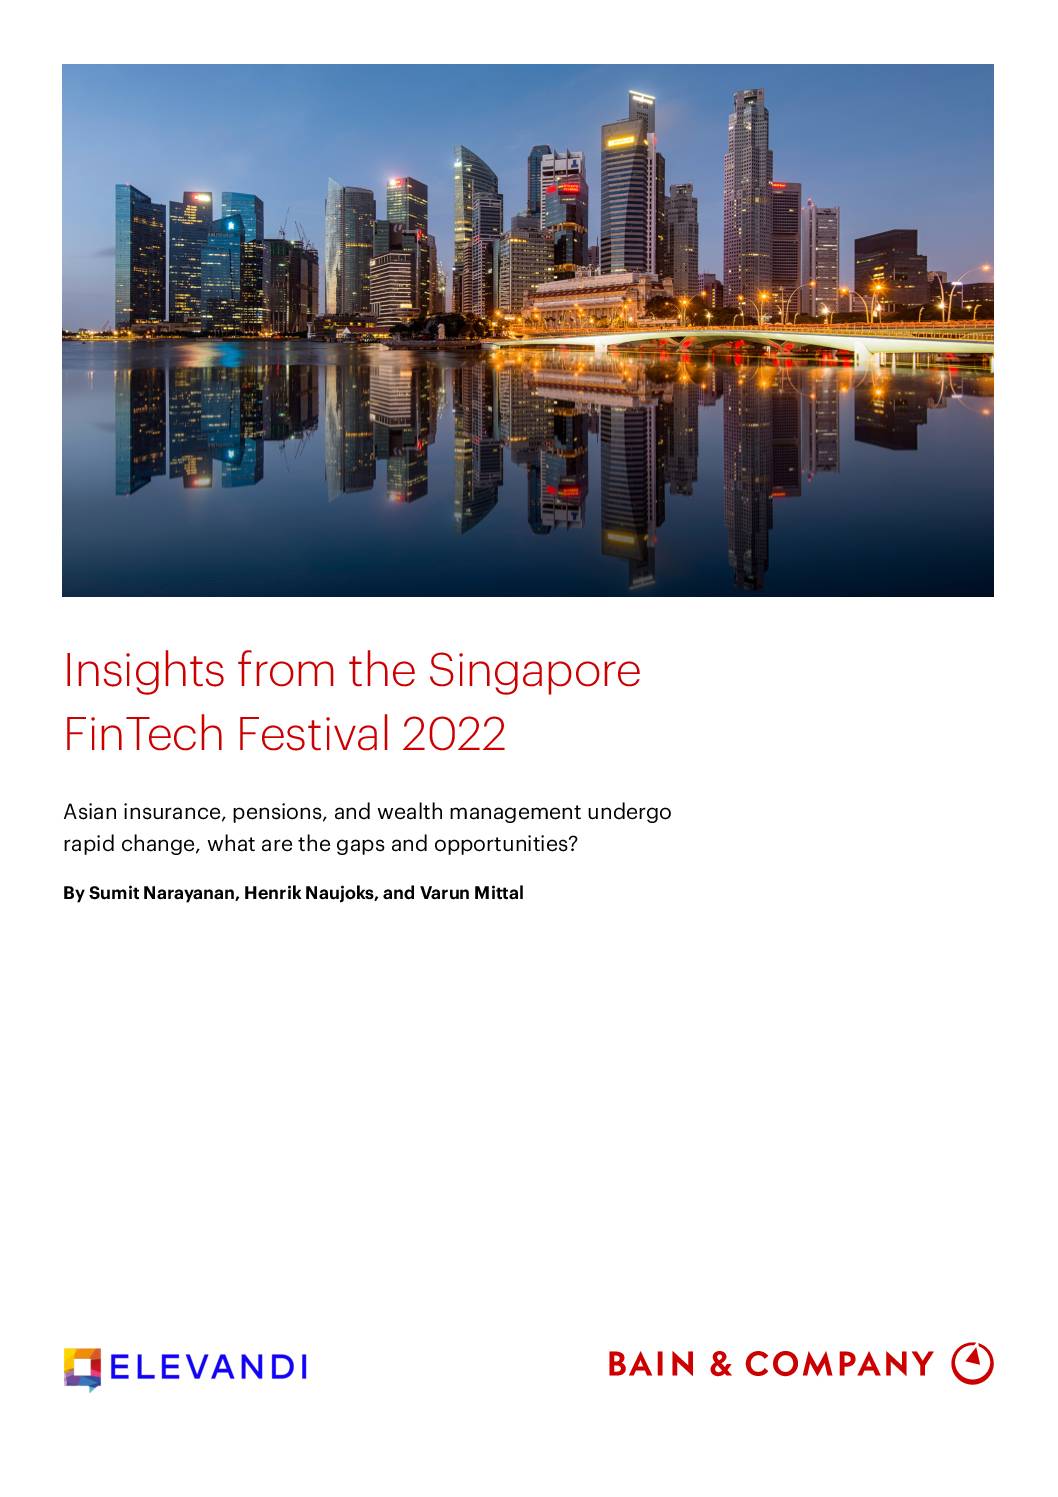 bain_brief_insights_from_the_singapore_fintech_festival_2022pdf-pdf